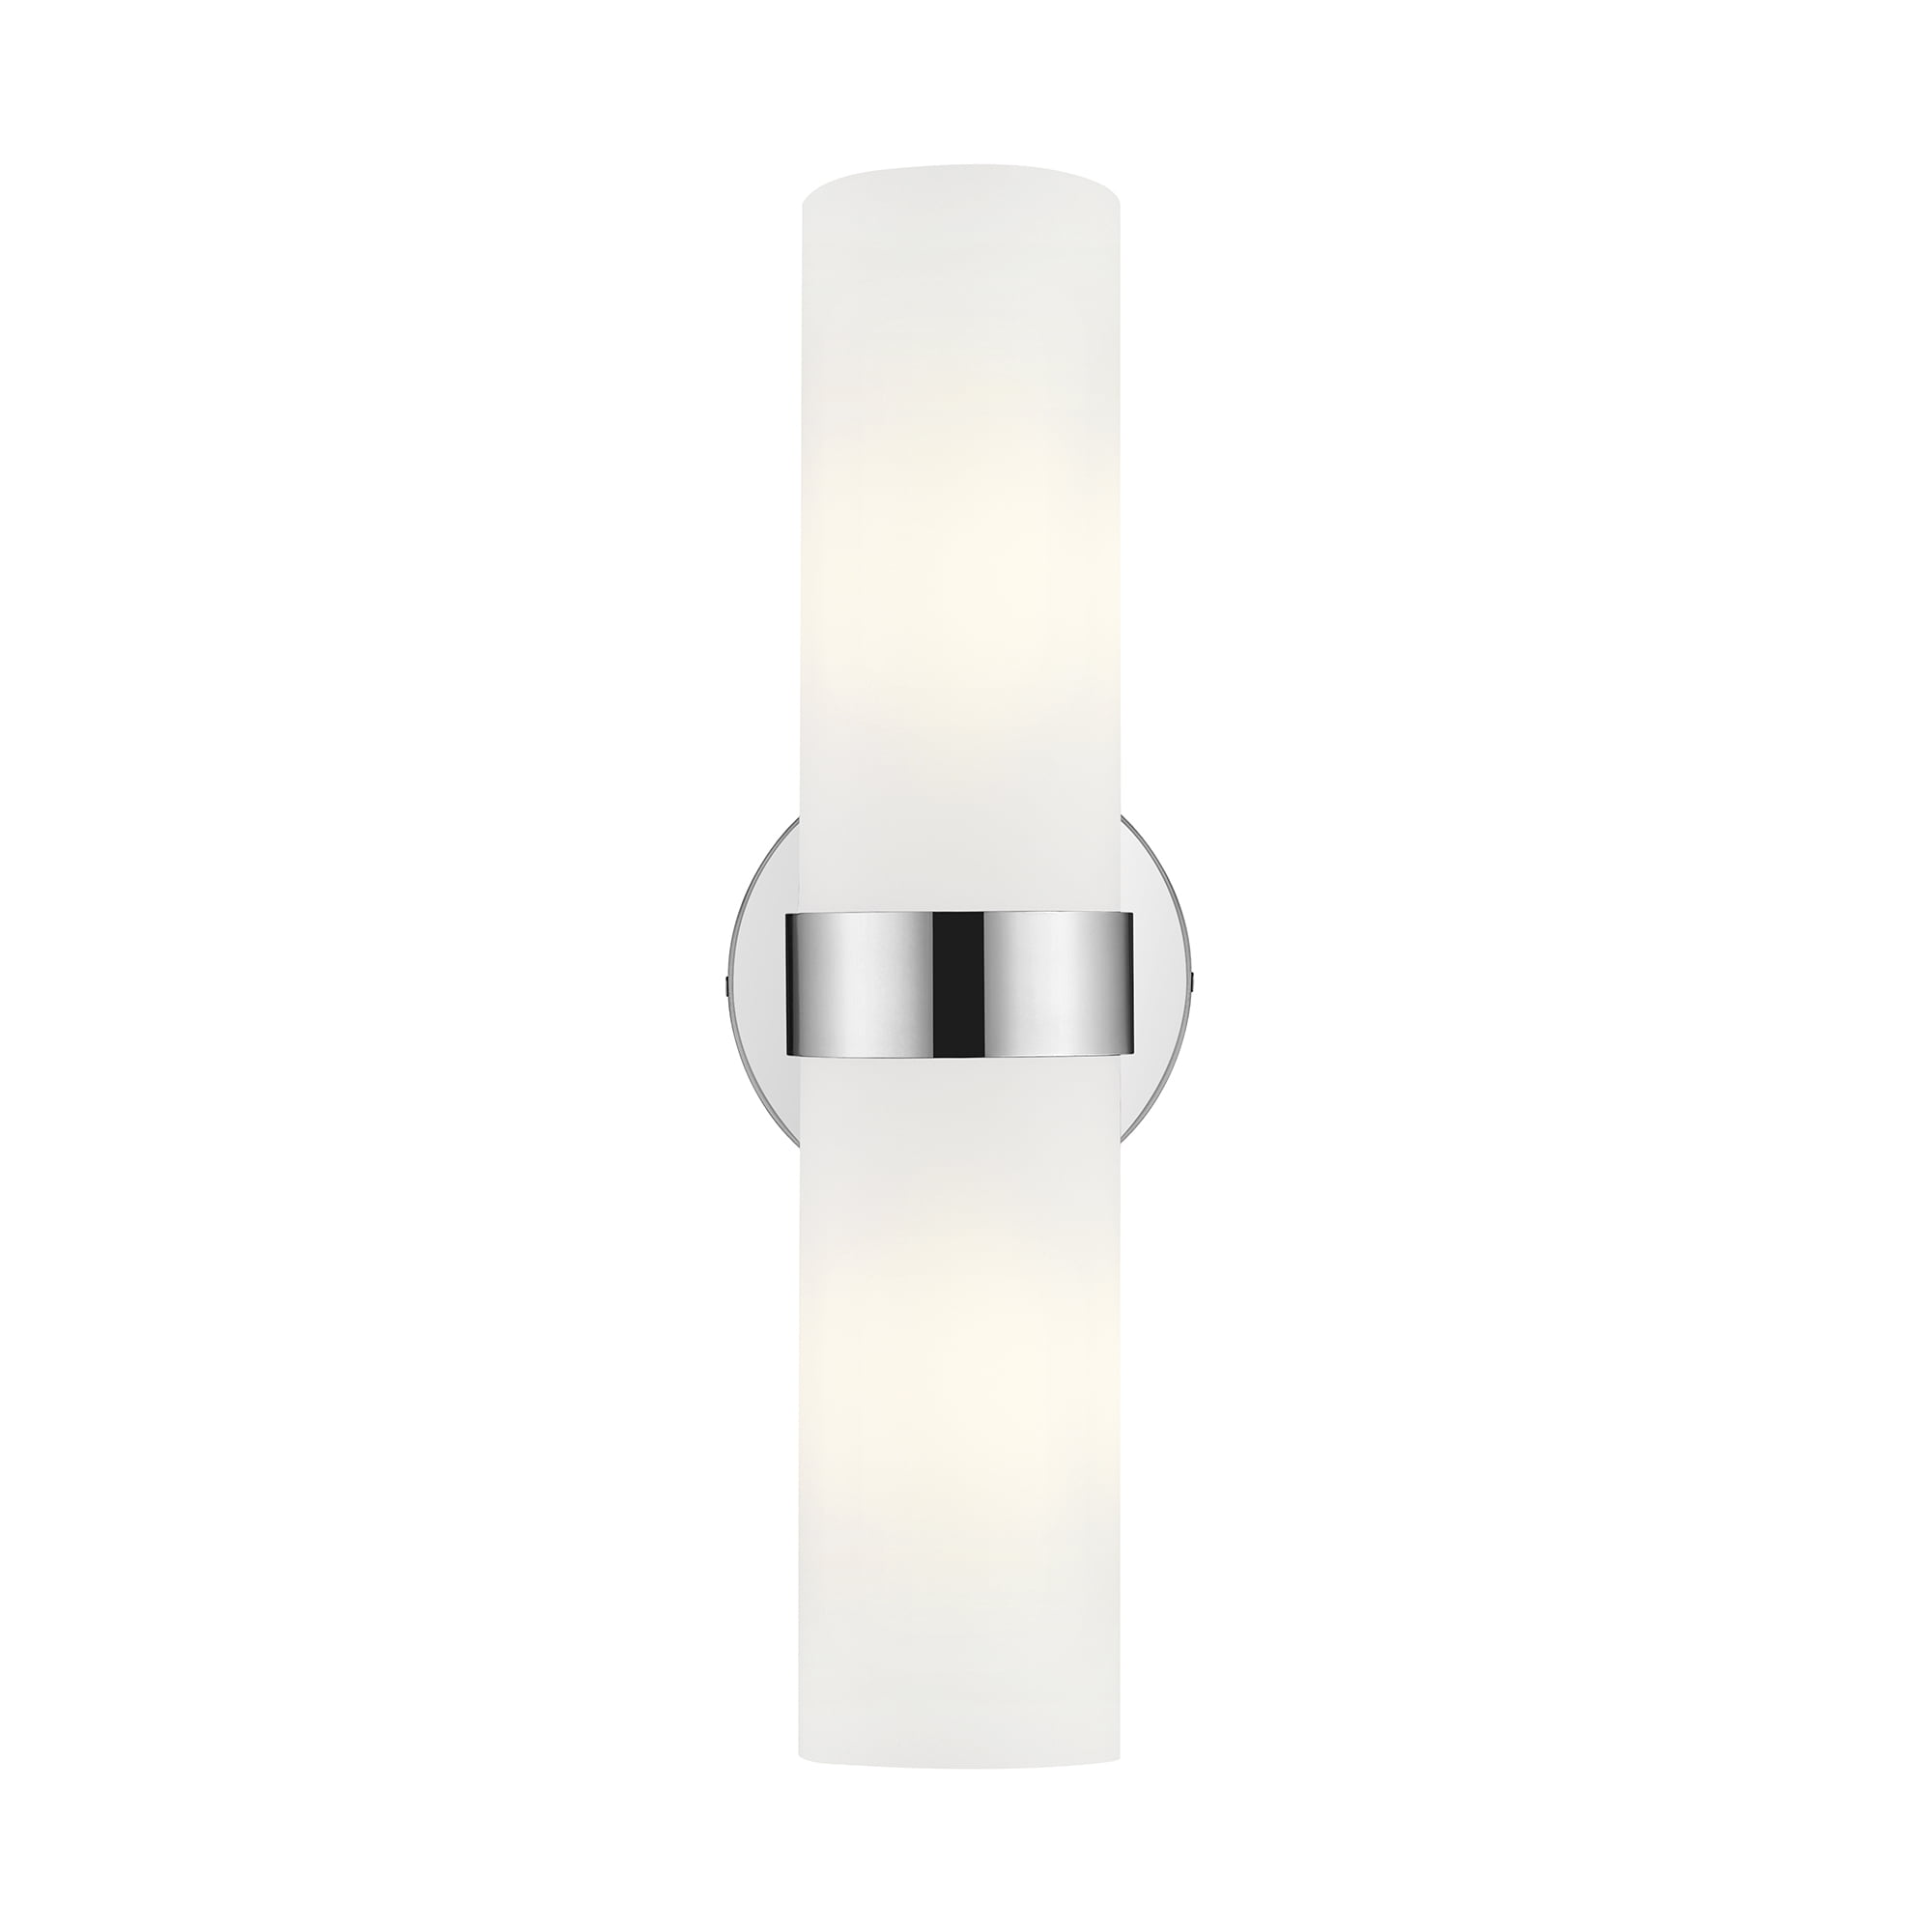 with White Straight Glass Shade 2 Light Chrome Hadley Wall Sconce 